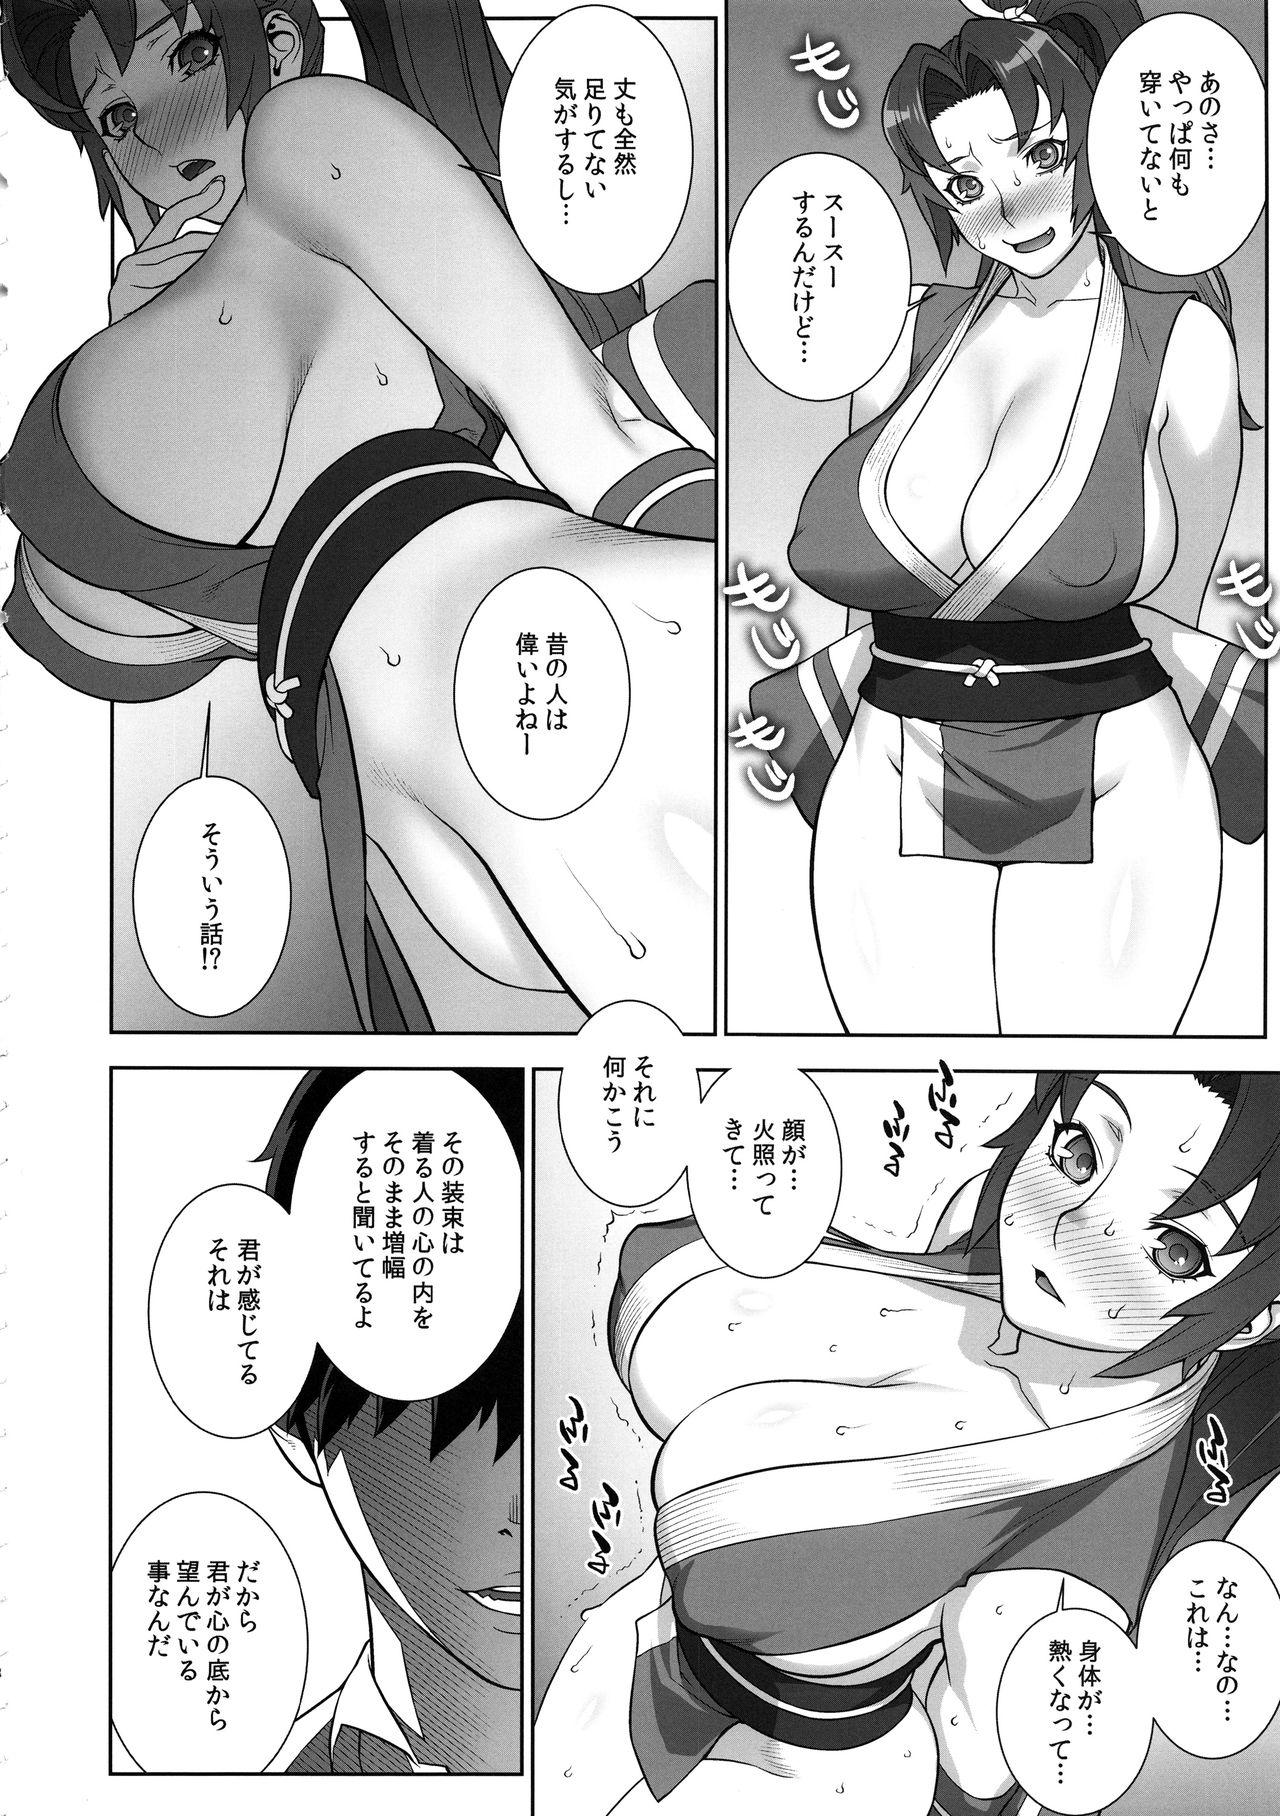 Flagra Domidare Kachousen - King of fighters Chaturbate - Page 7